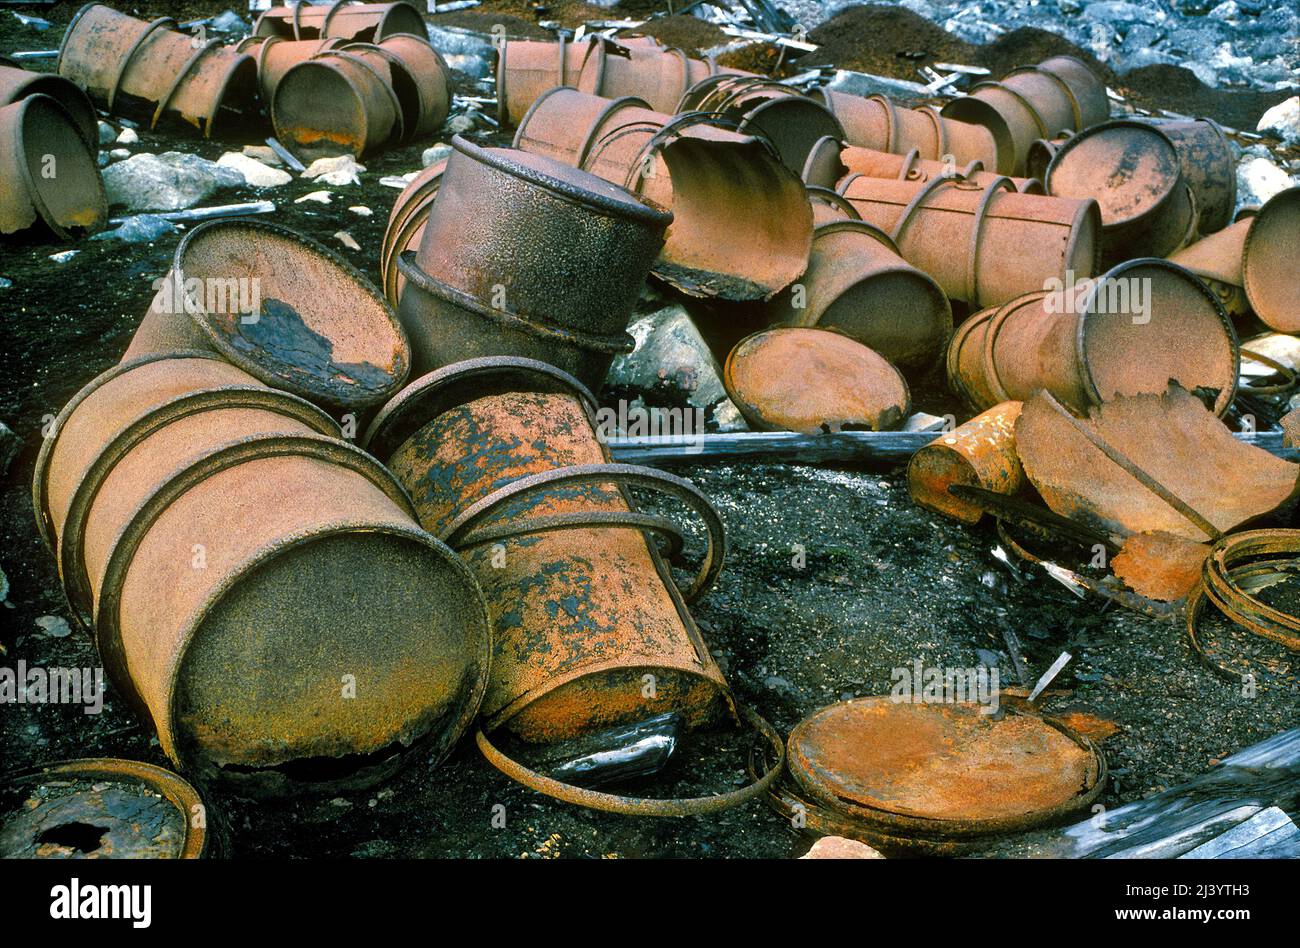 Rusting Drums, Toxic Waste Dump Stock Photo